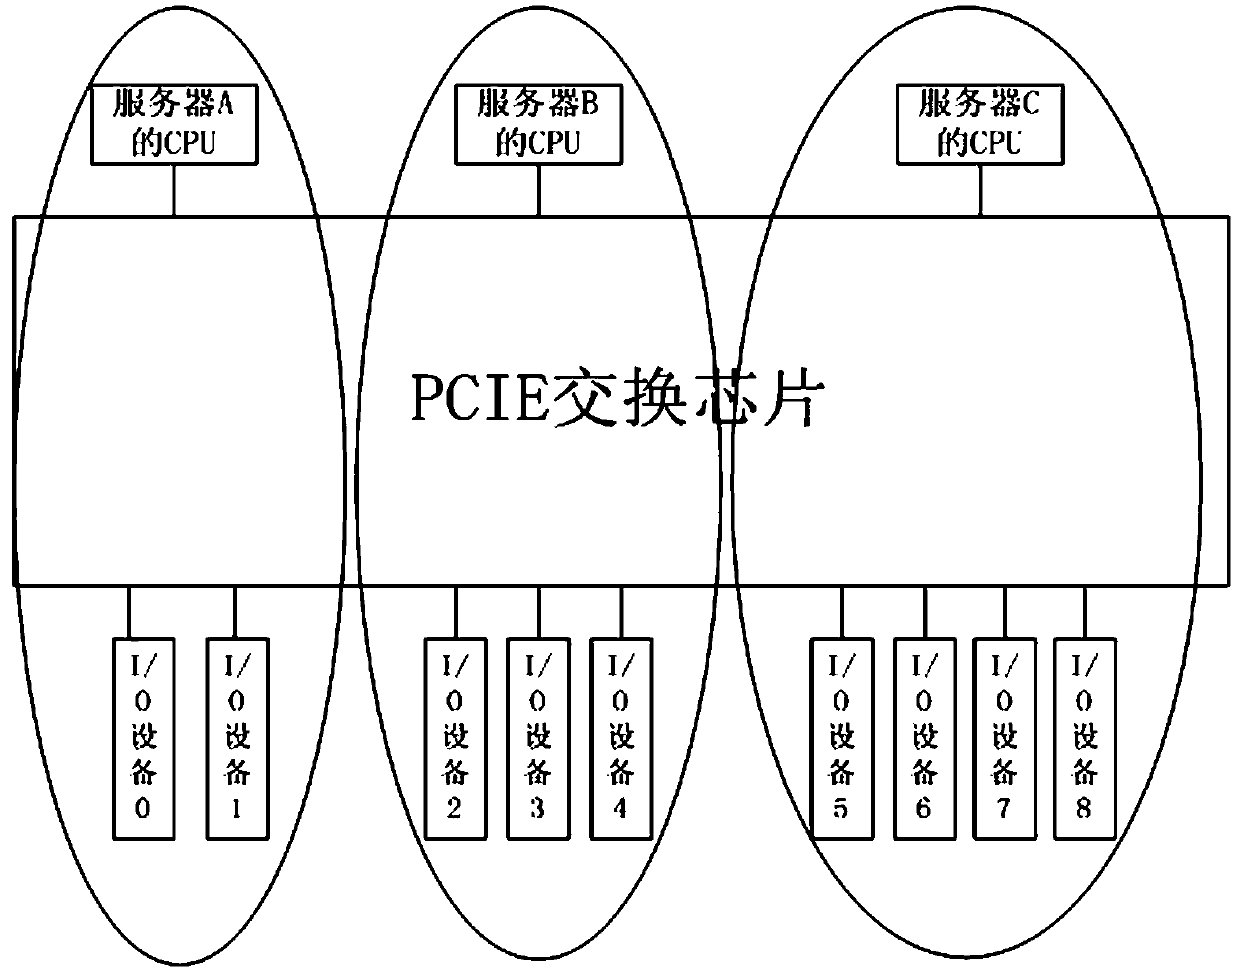 PCIE exchange chip port configuration system and method supporting virtual exchange